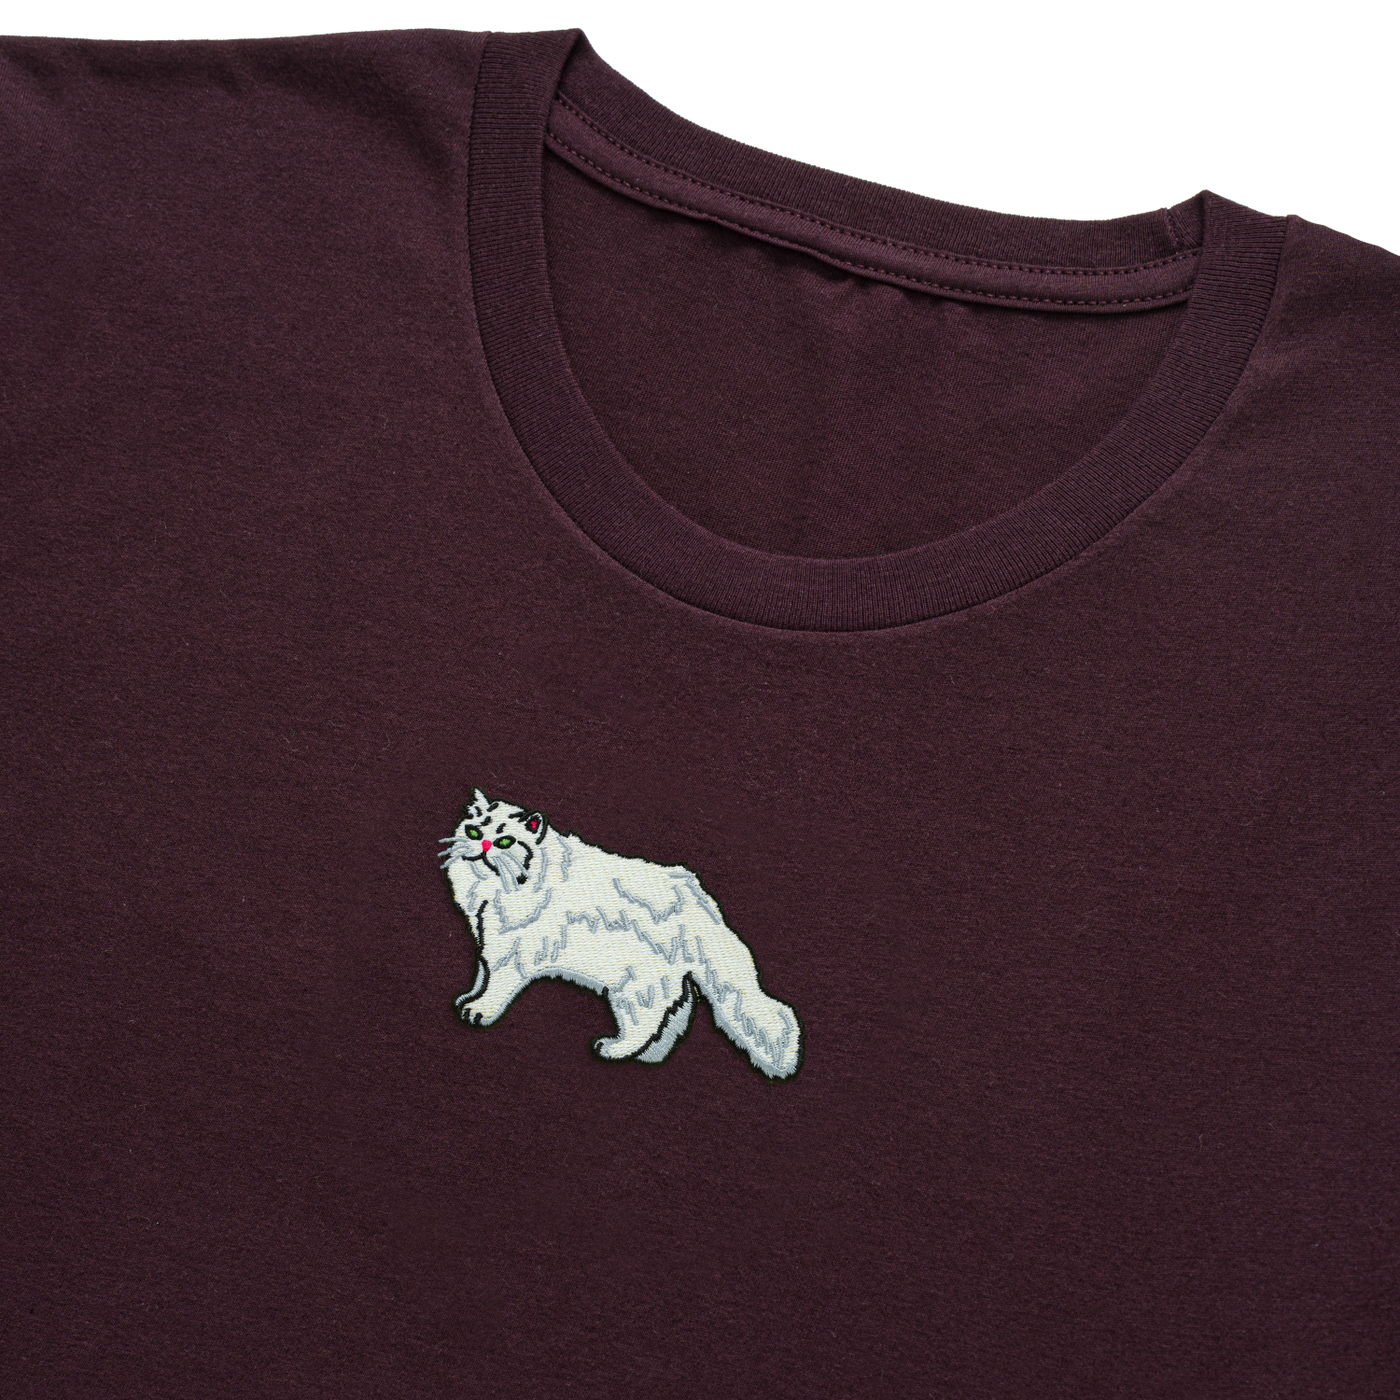 Bobby's Planet Men's Embroidered Persian T-Shirt from Paws Dog Cat Animals Collection in Oxblood Color#color_oxblood